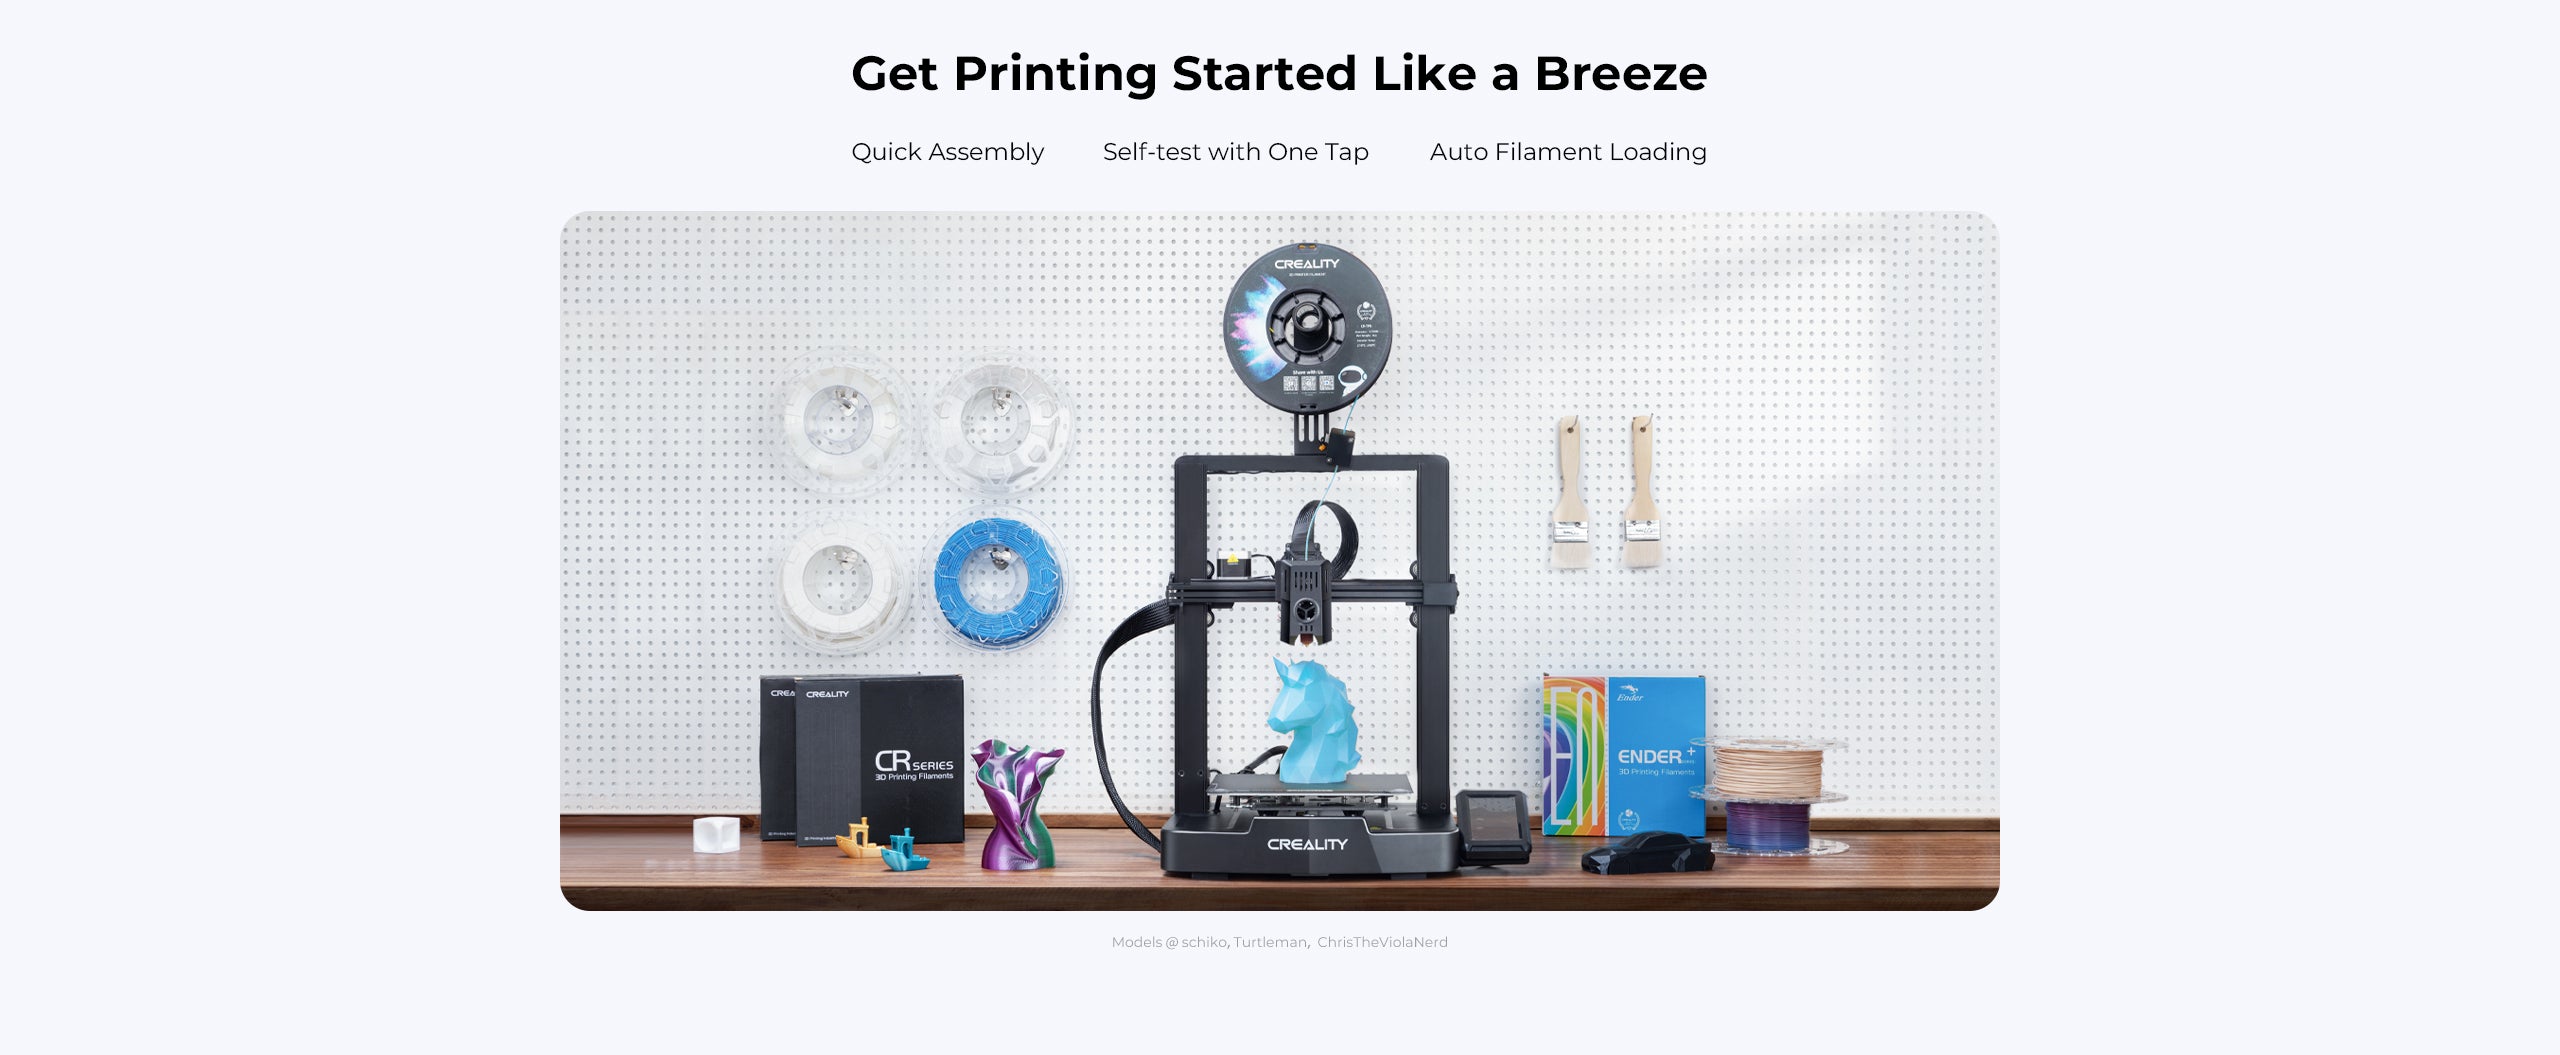 Get printing started like a breeze